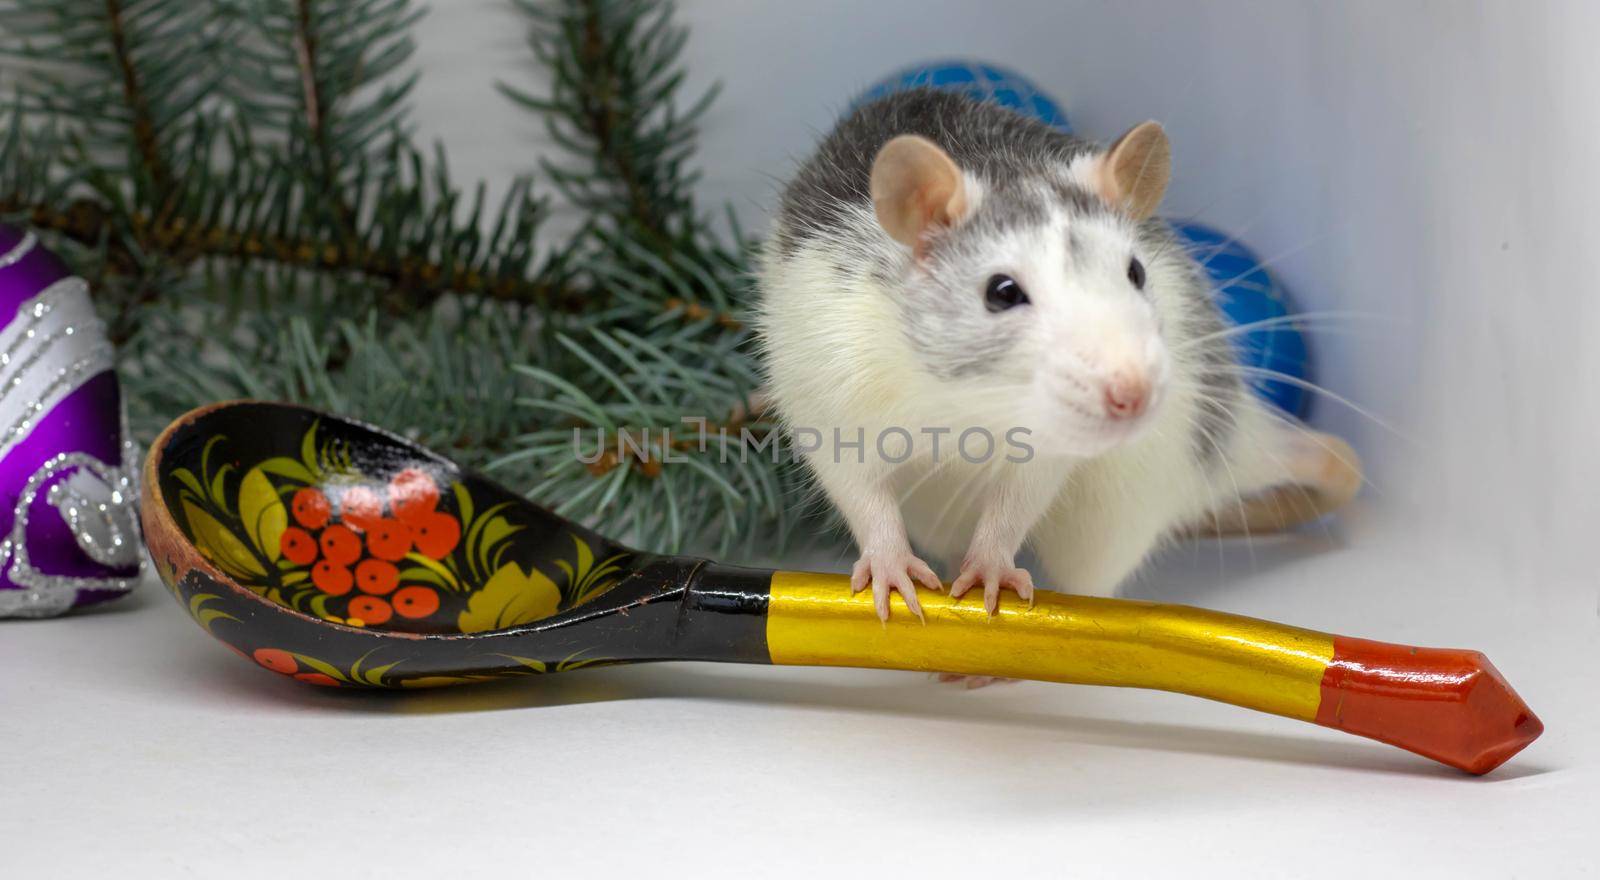 Cute silver rat sits around a large wooden spoon. Chinese New Year symbol 2020. by lapushka62